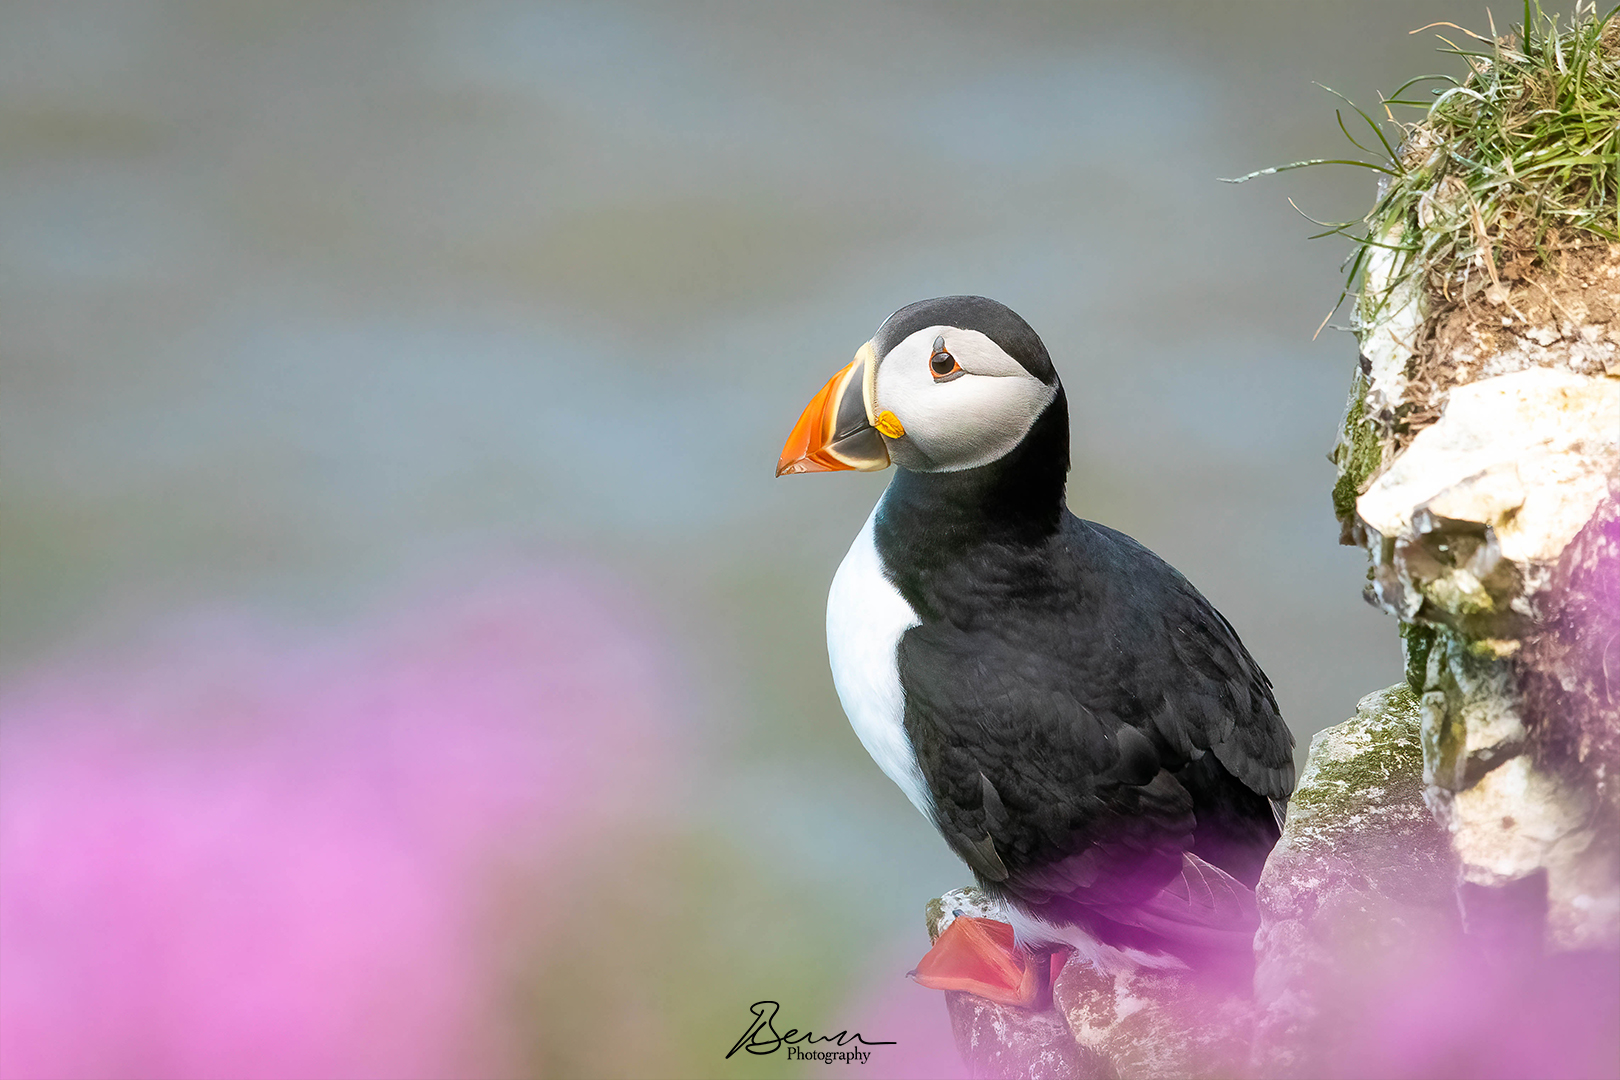 “Puffin and pink flowers”. A puffin perched on a cliff edge at RSPB Bempton cliffs, surrounded by pink nettle flowers.